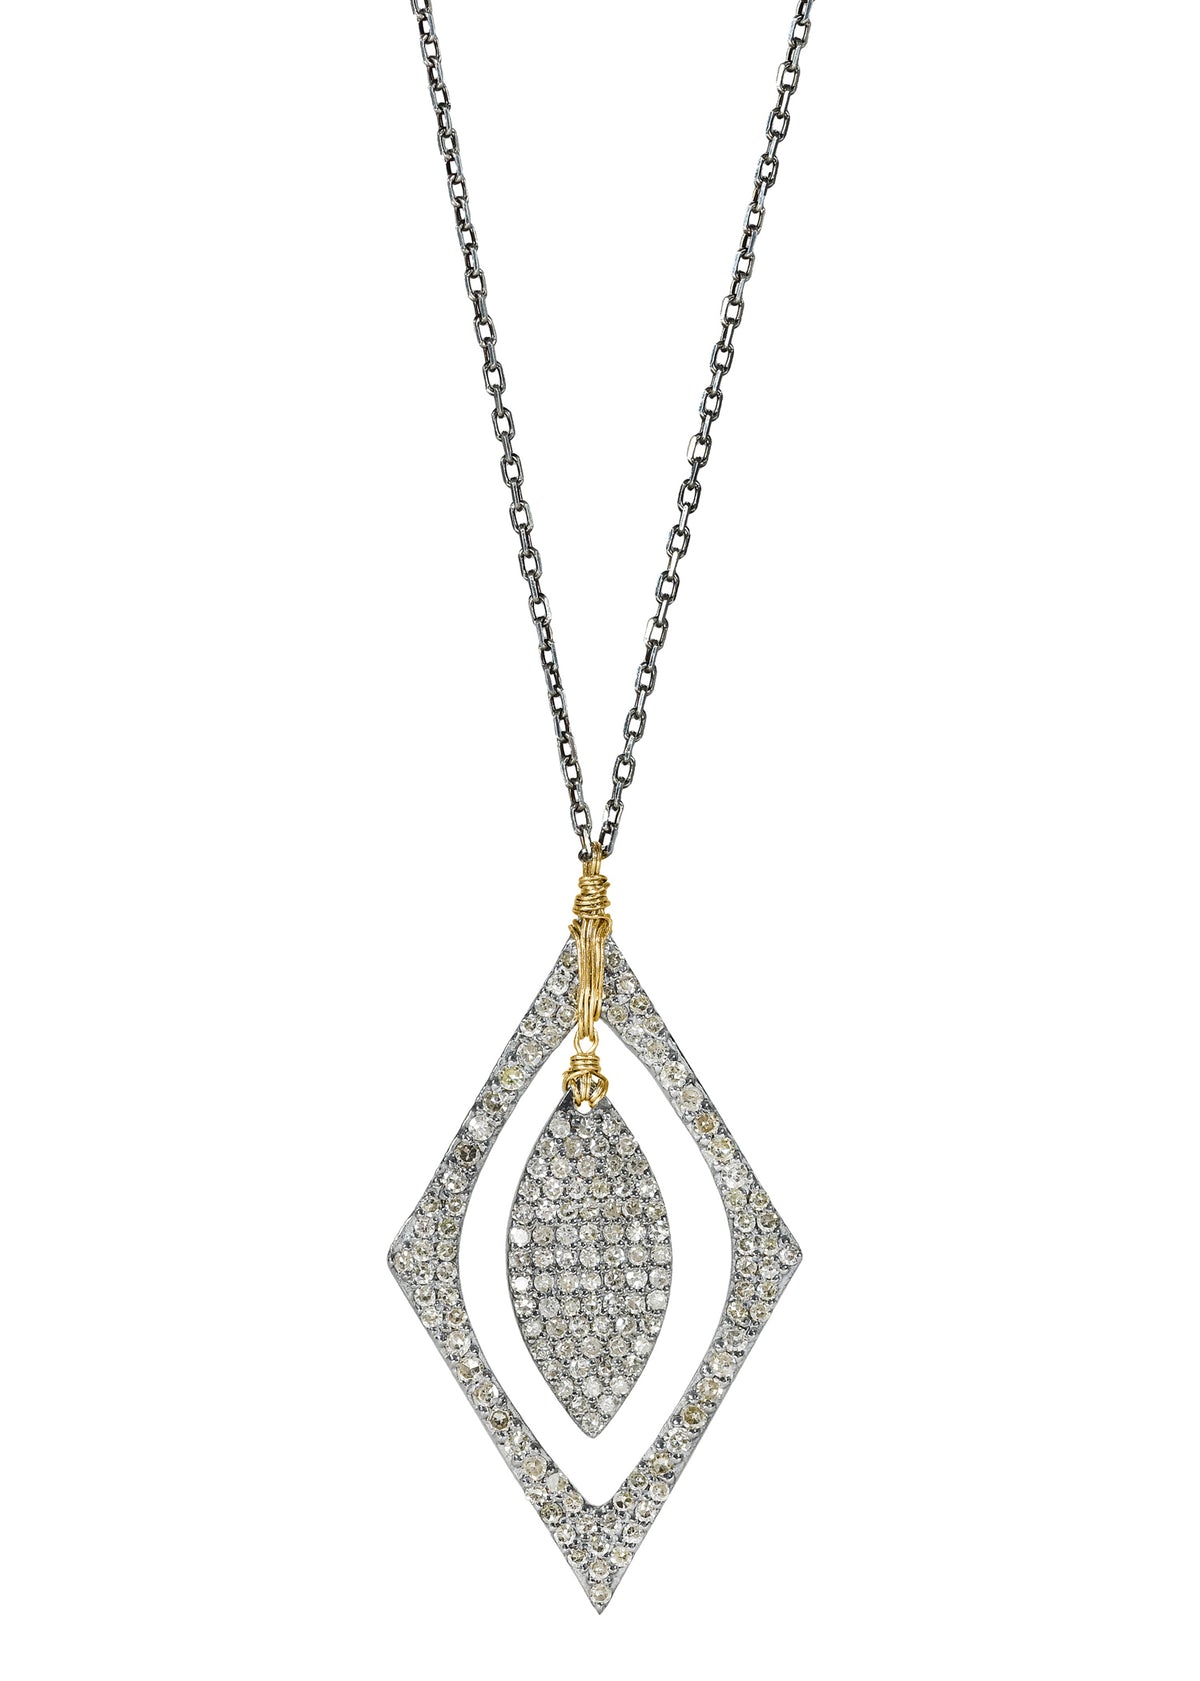 Diamond 14k gold Sterling silver Mixed metal Necklace measures 17&quot; in length Pendant measures 1-1/2&quot; in length and 7/8&quot; in width at the widest point Handmade in our Los Angeles studio